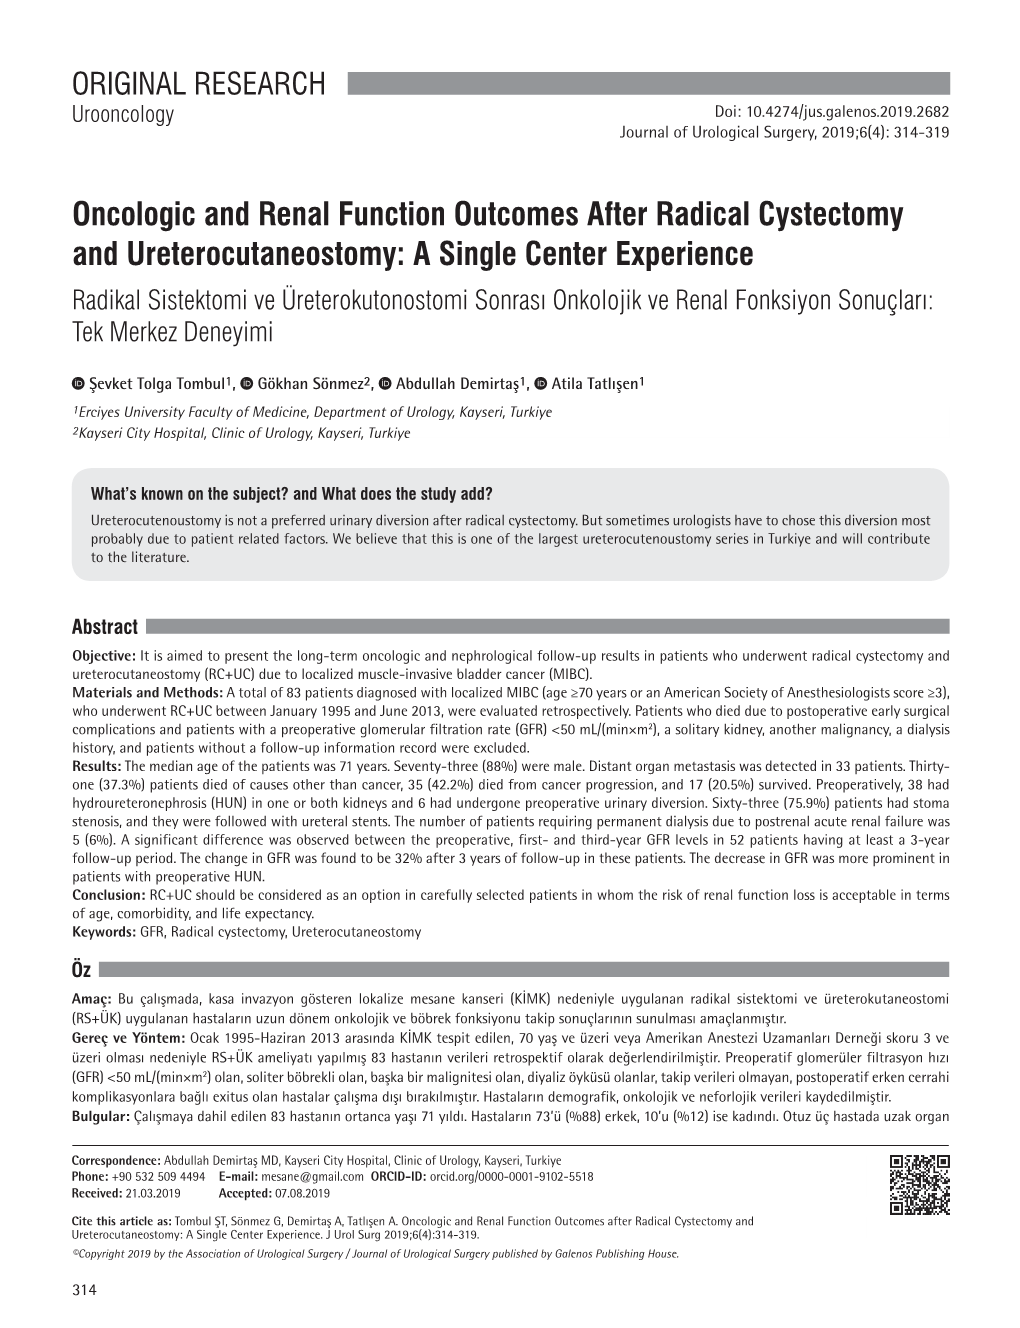 Oncologic and Renal Function Outcomes After Radical Cystectomy